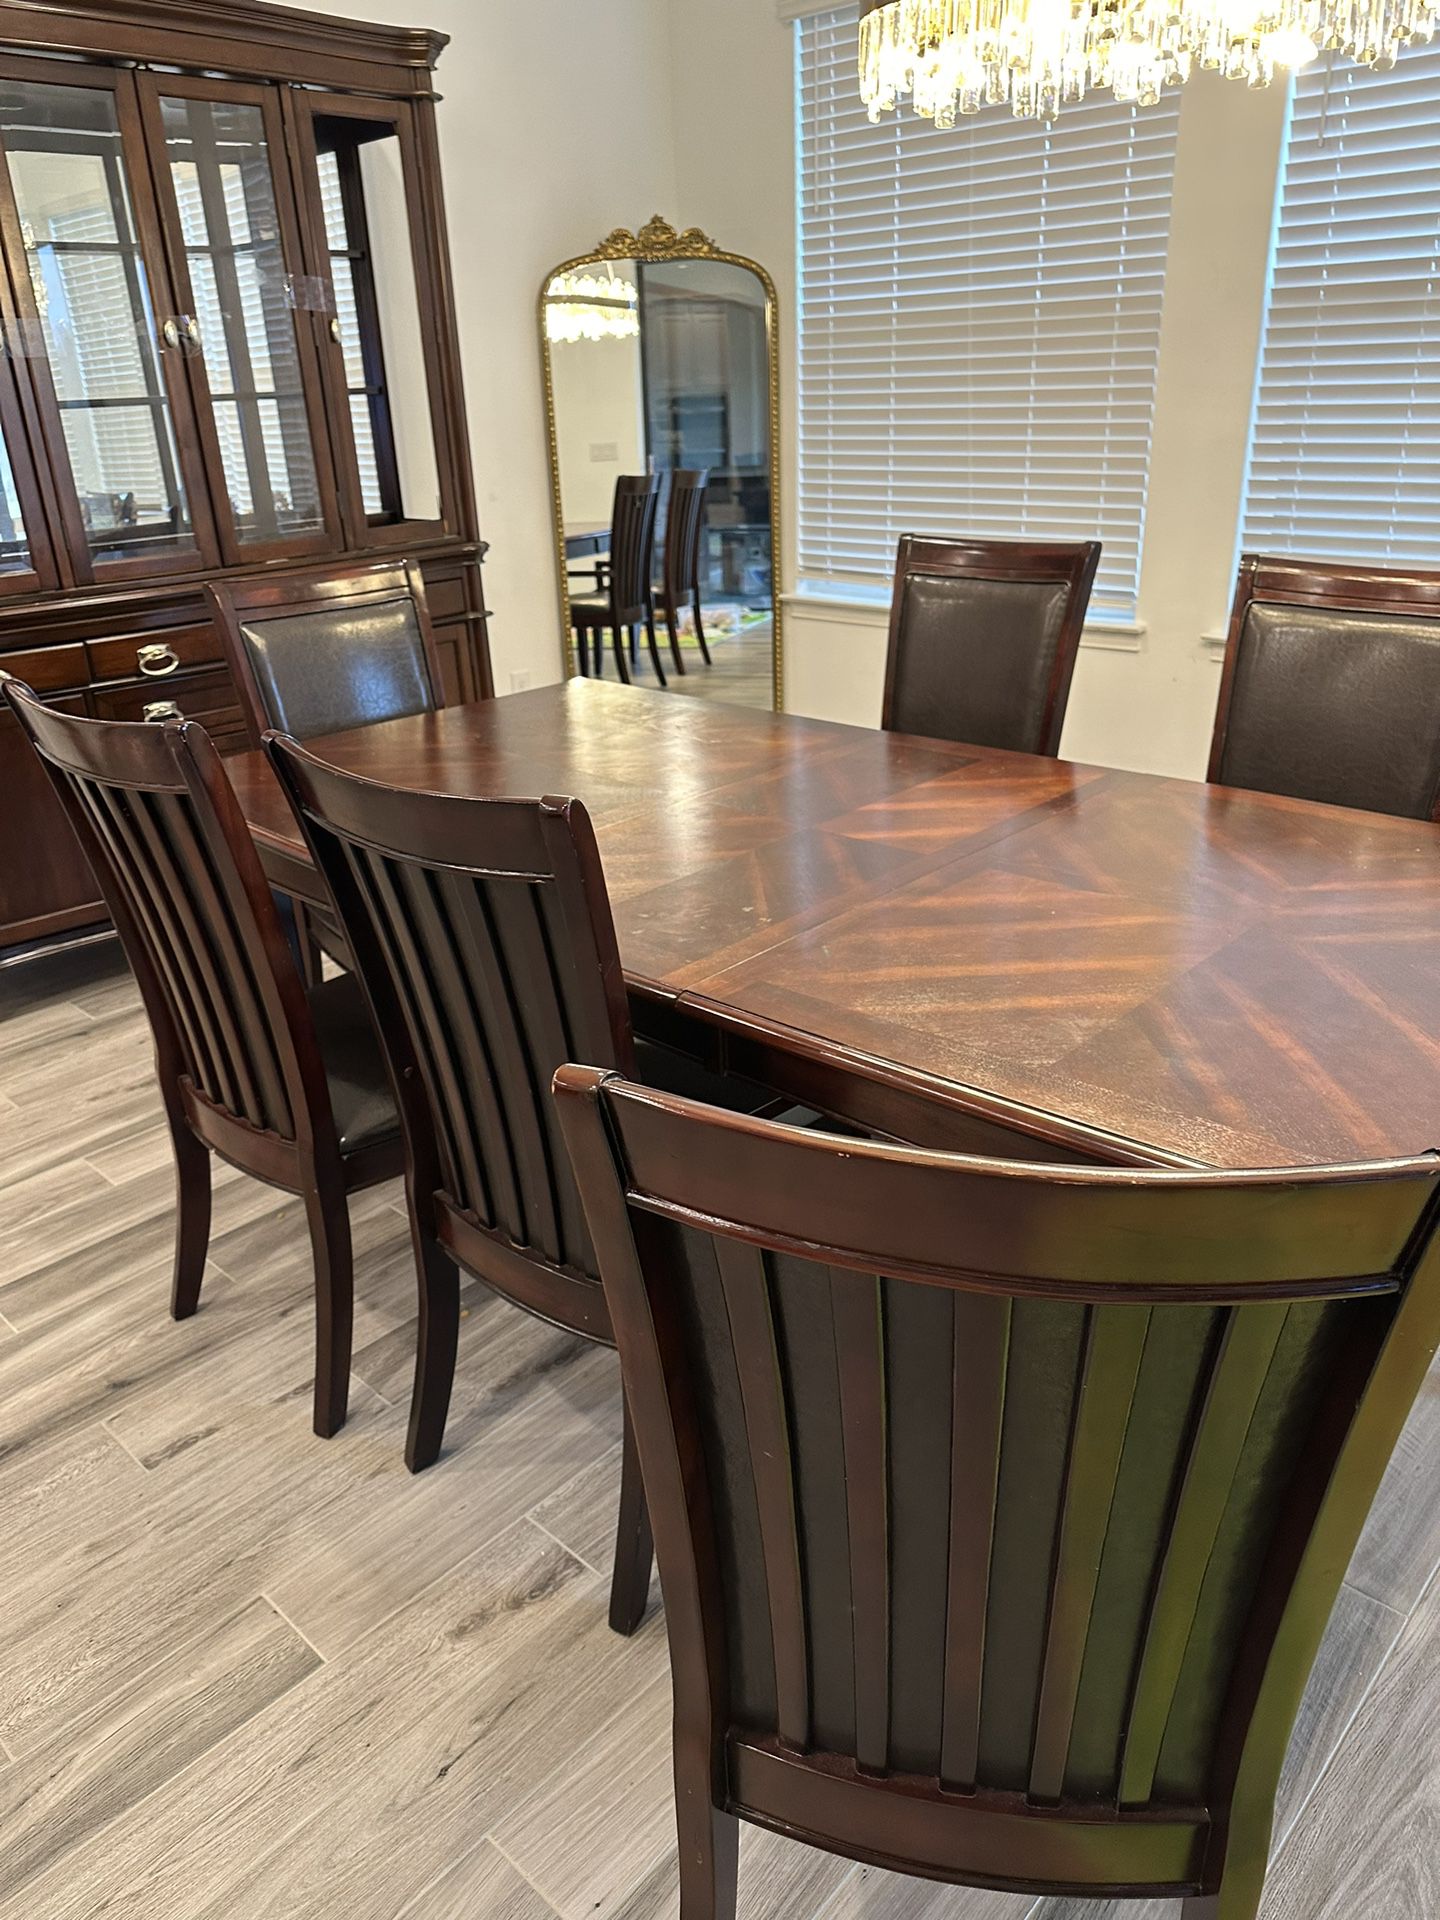 7 Piece Dining Set- 6 Chairs And a Table